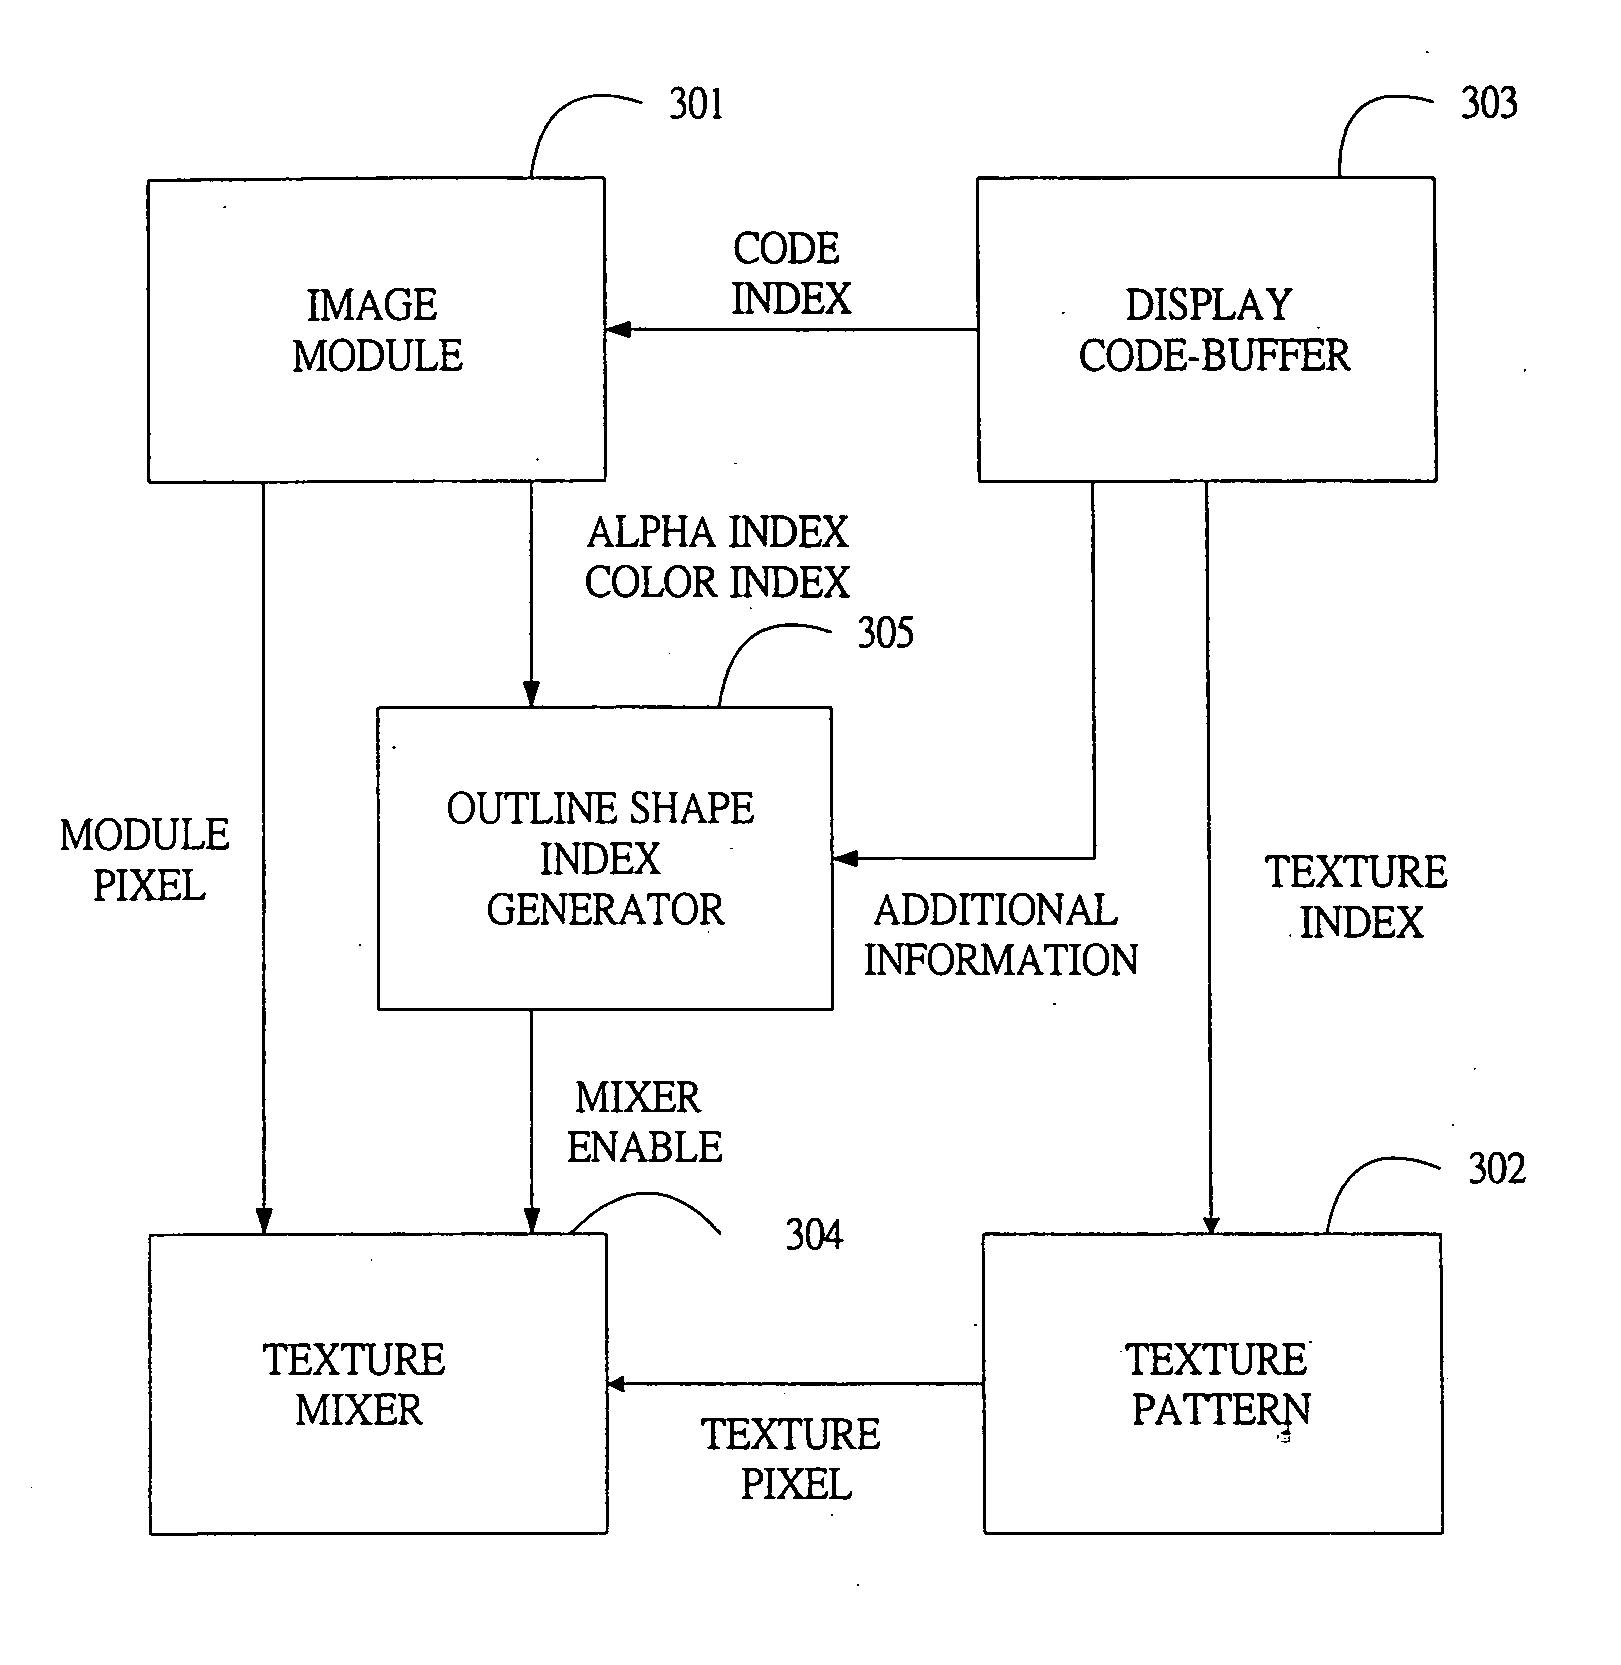 User interface display apparatus using texture mapping method